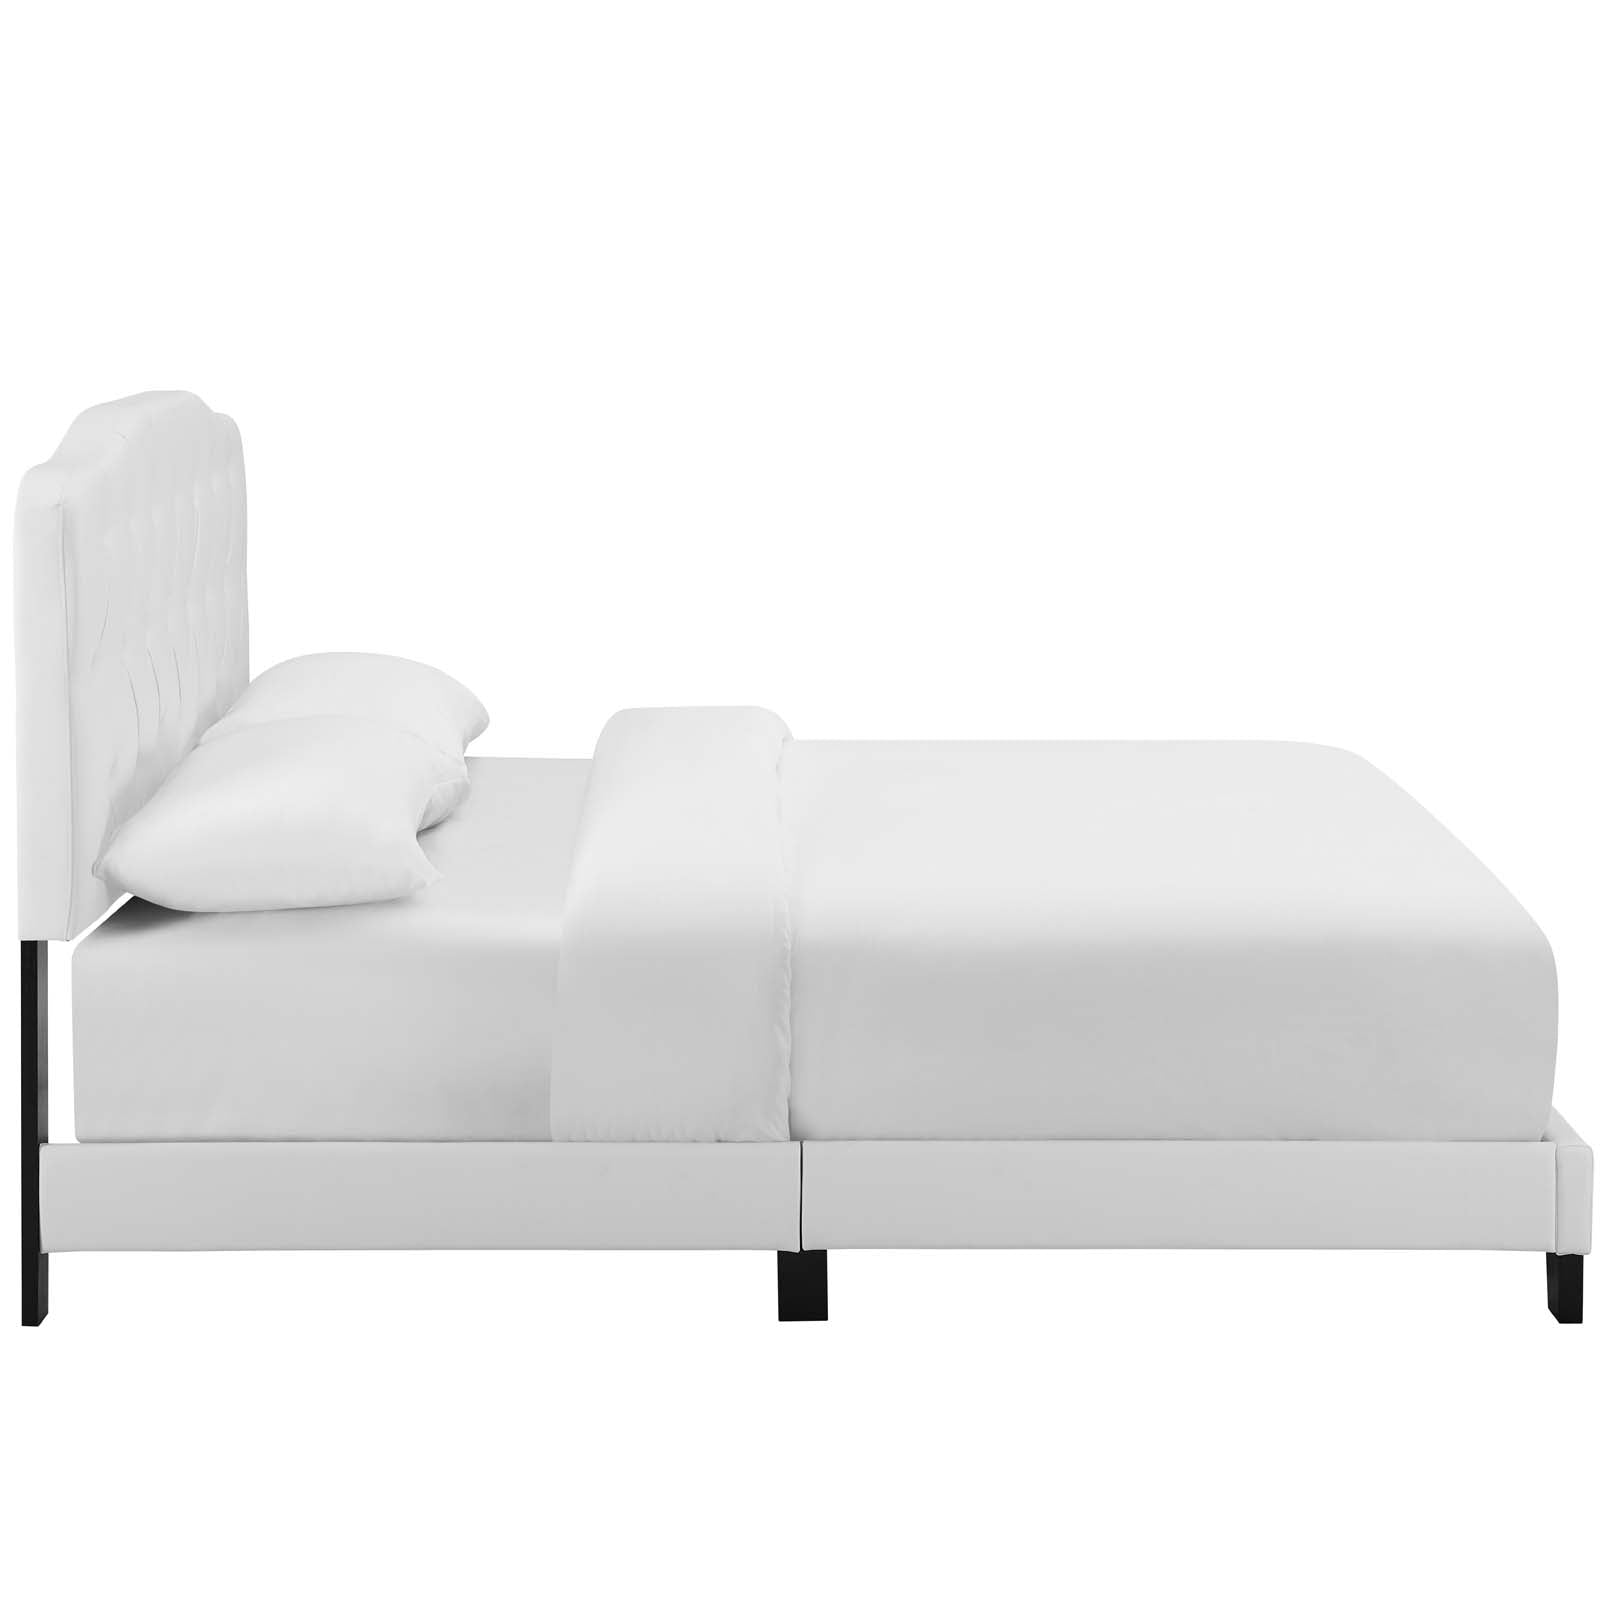 Modway Beds - Amelia Queen Faux Leather Bed White